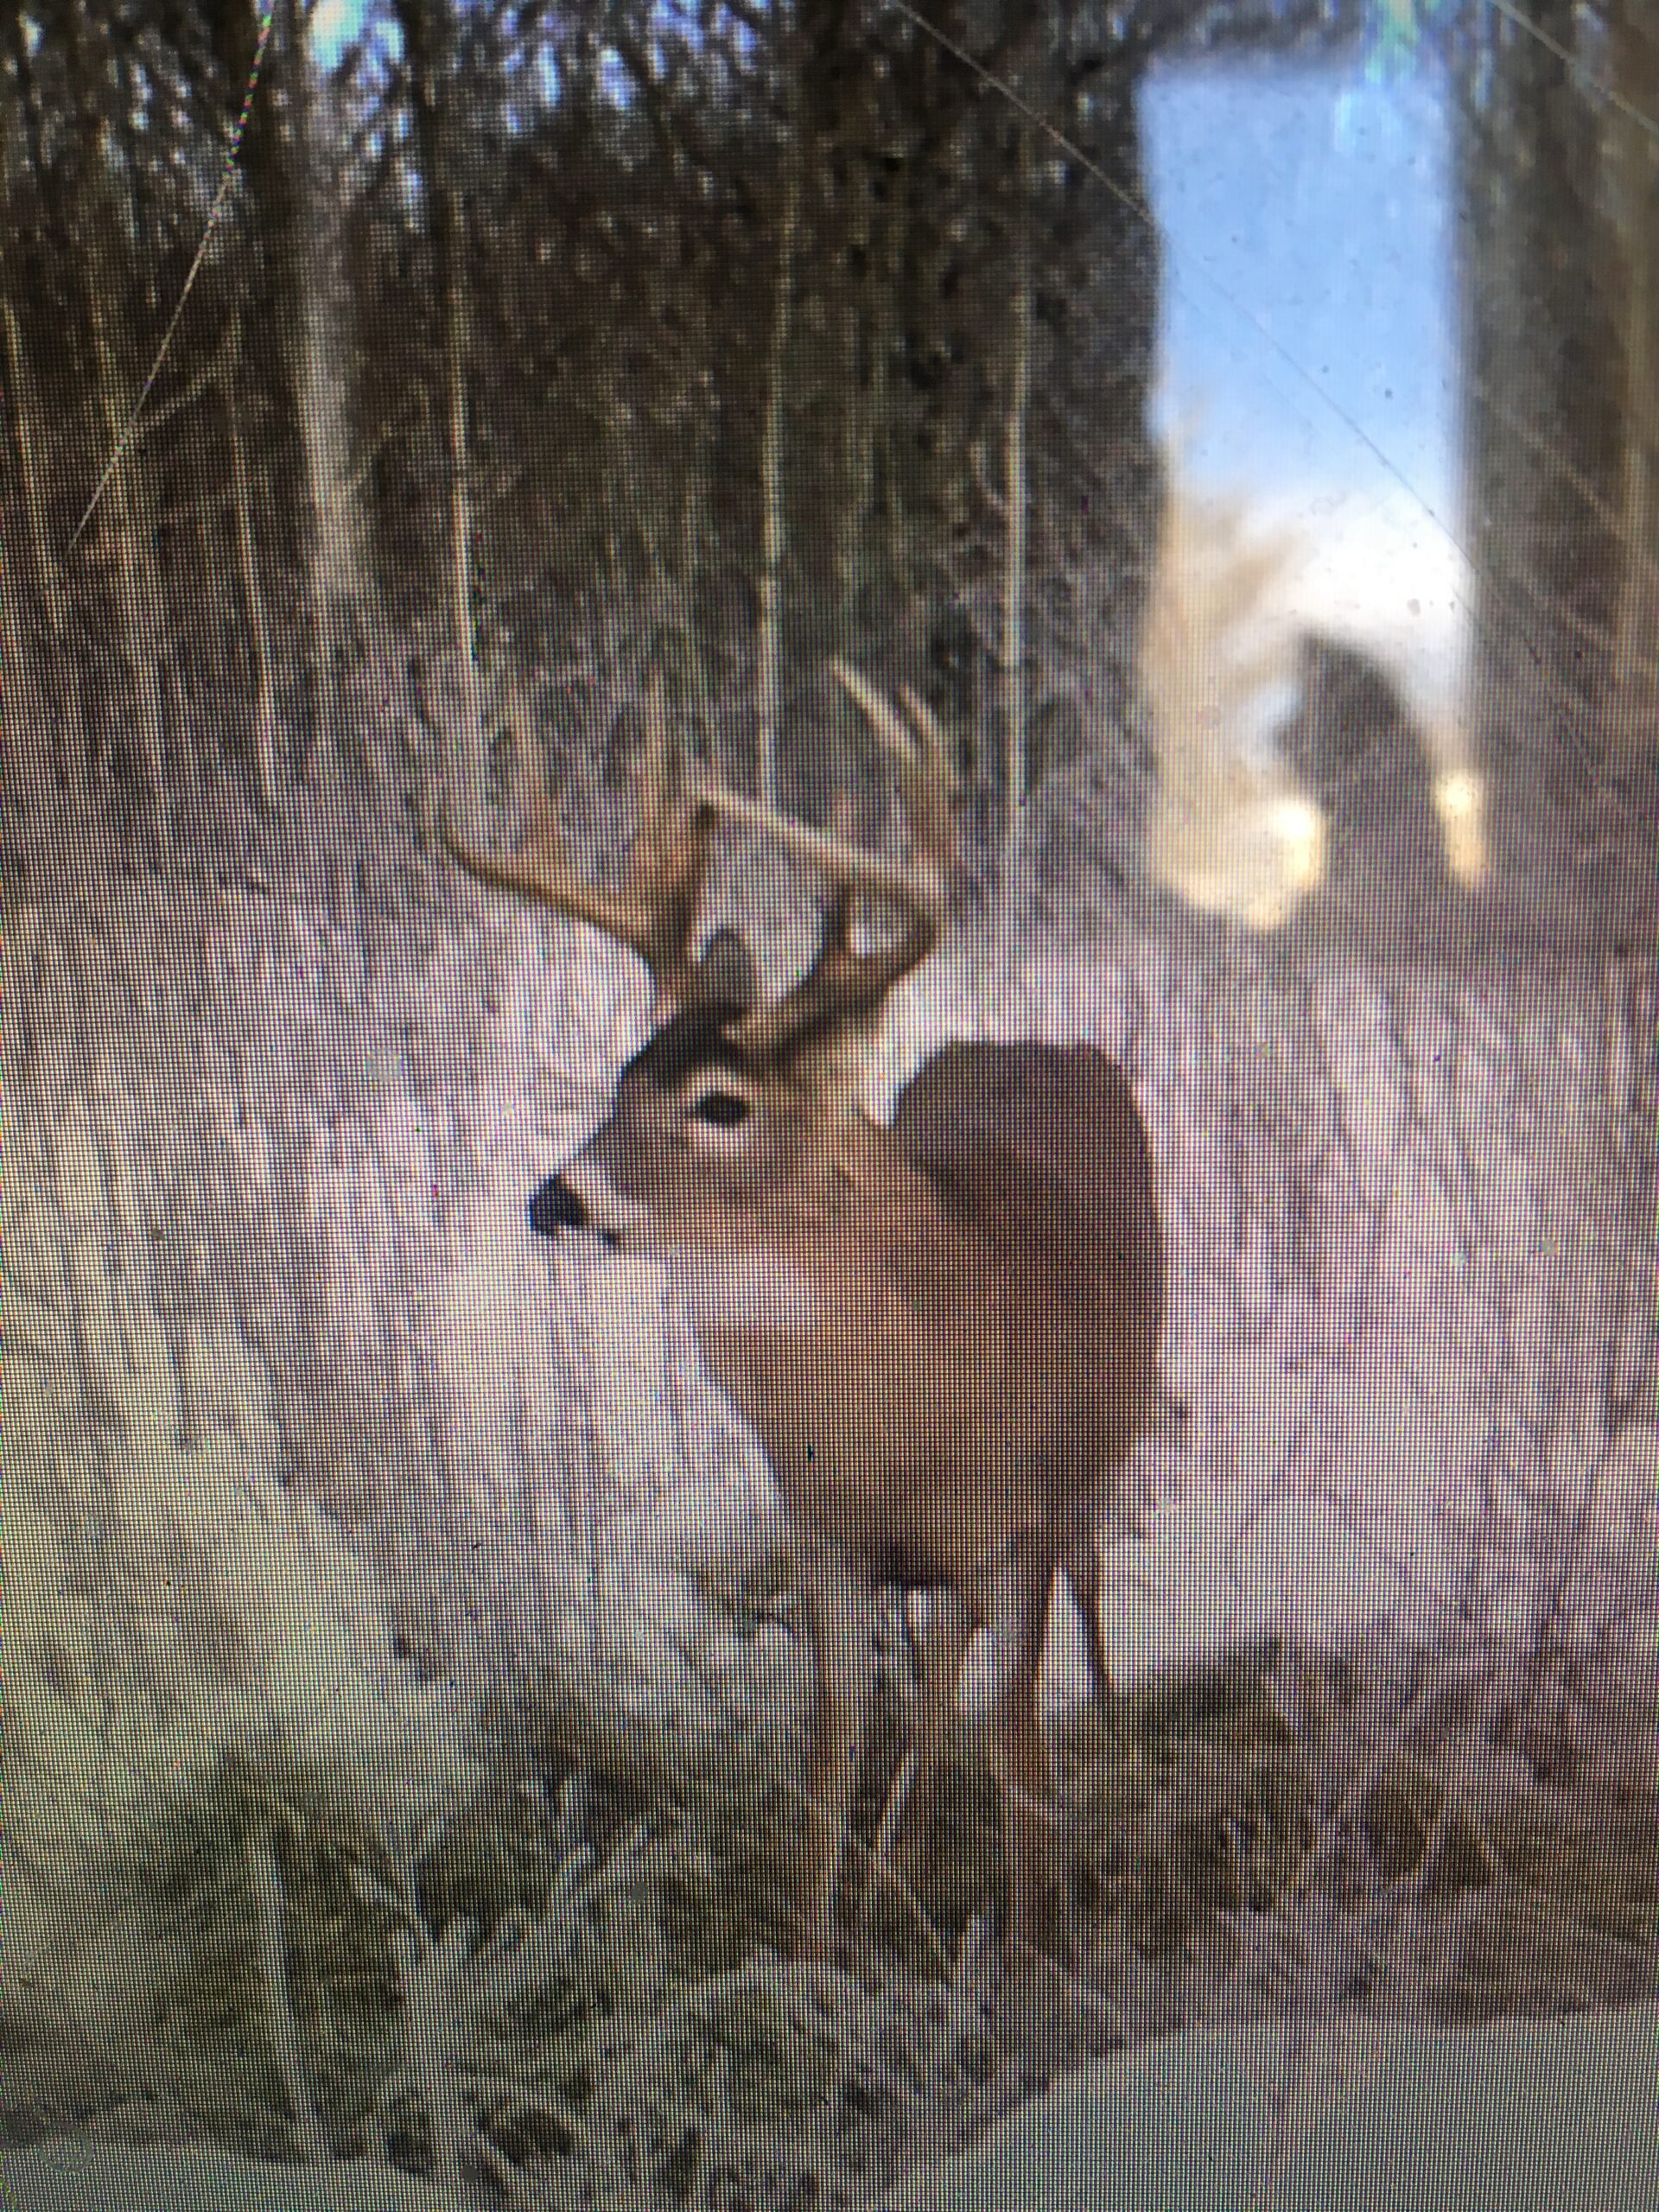 Saskatchewan Whitetail Outfitters |Guided Deer Hunting & Outfitters